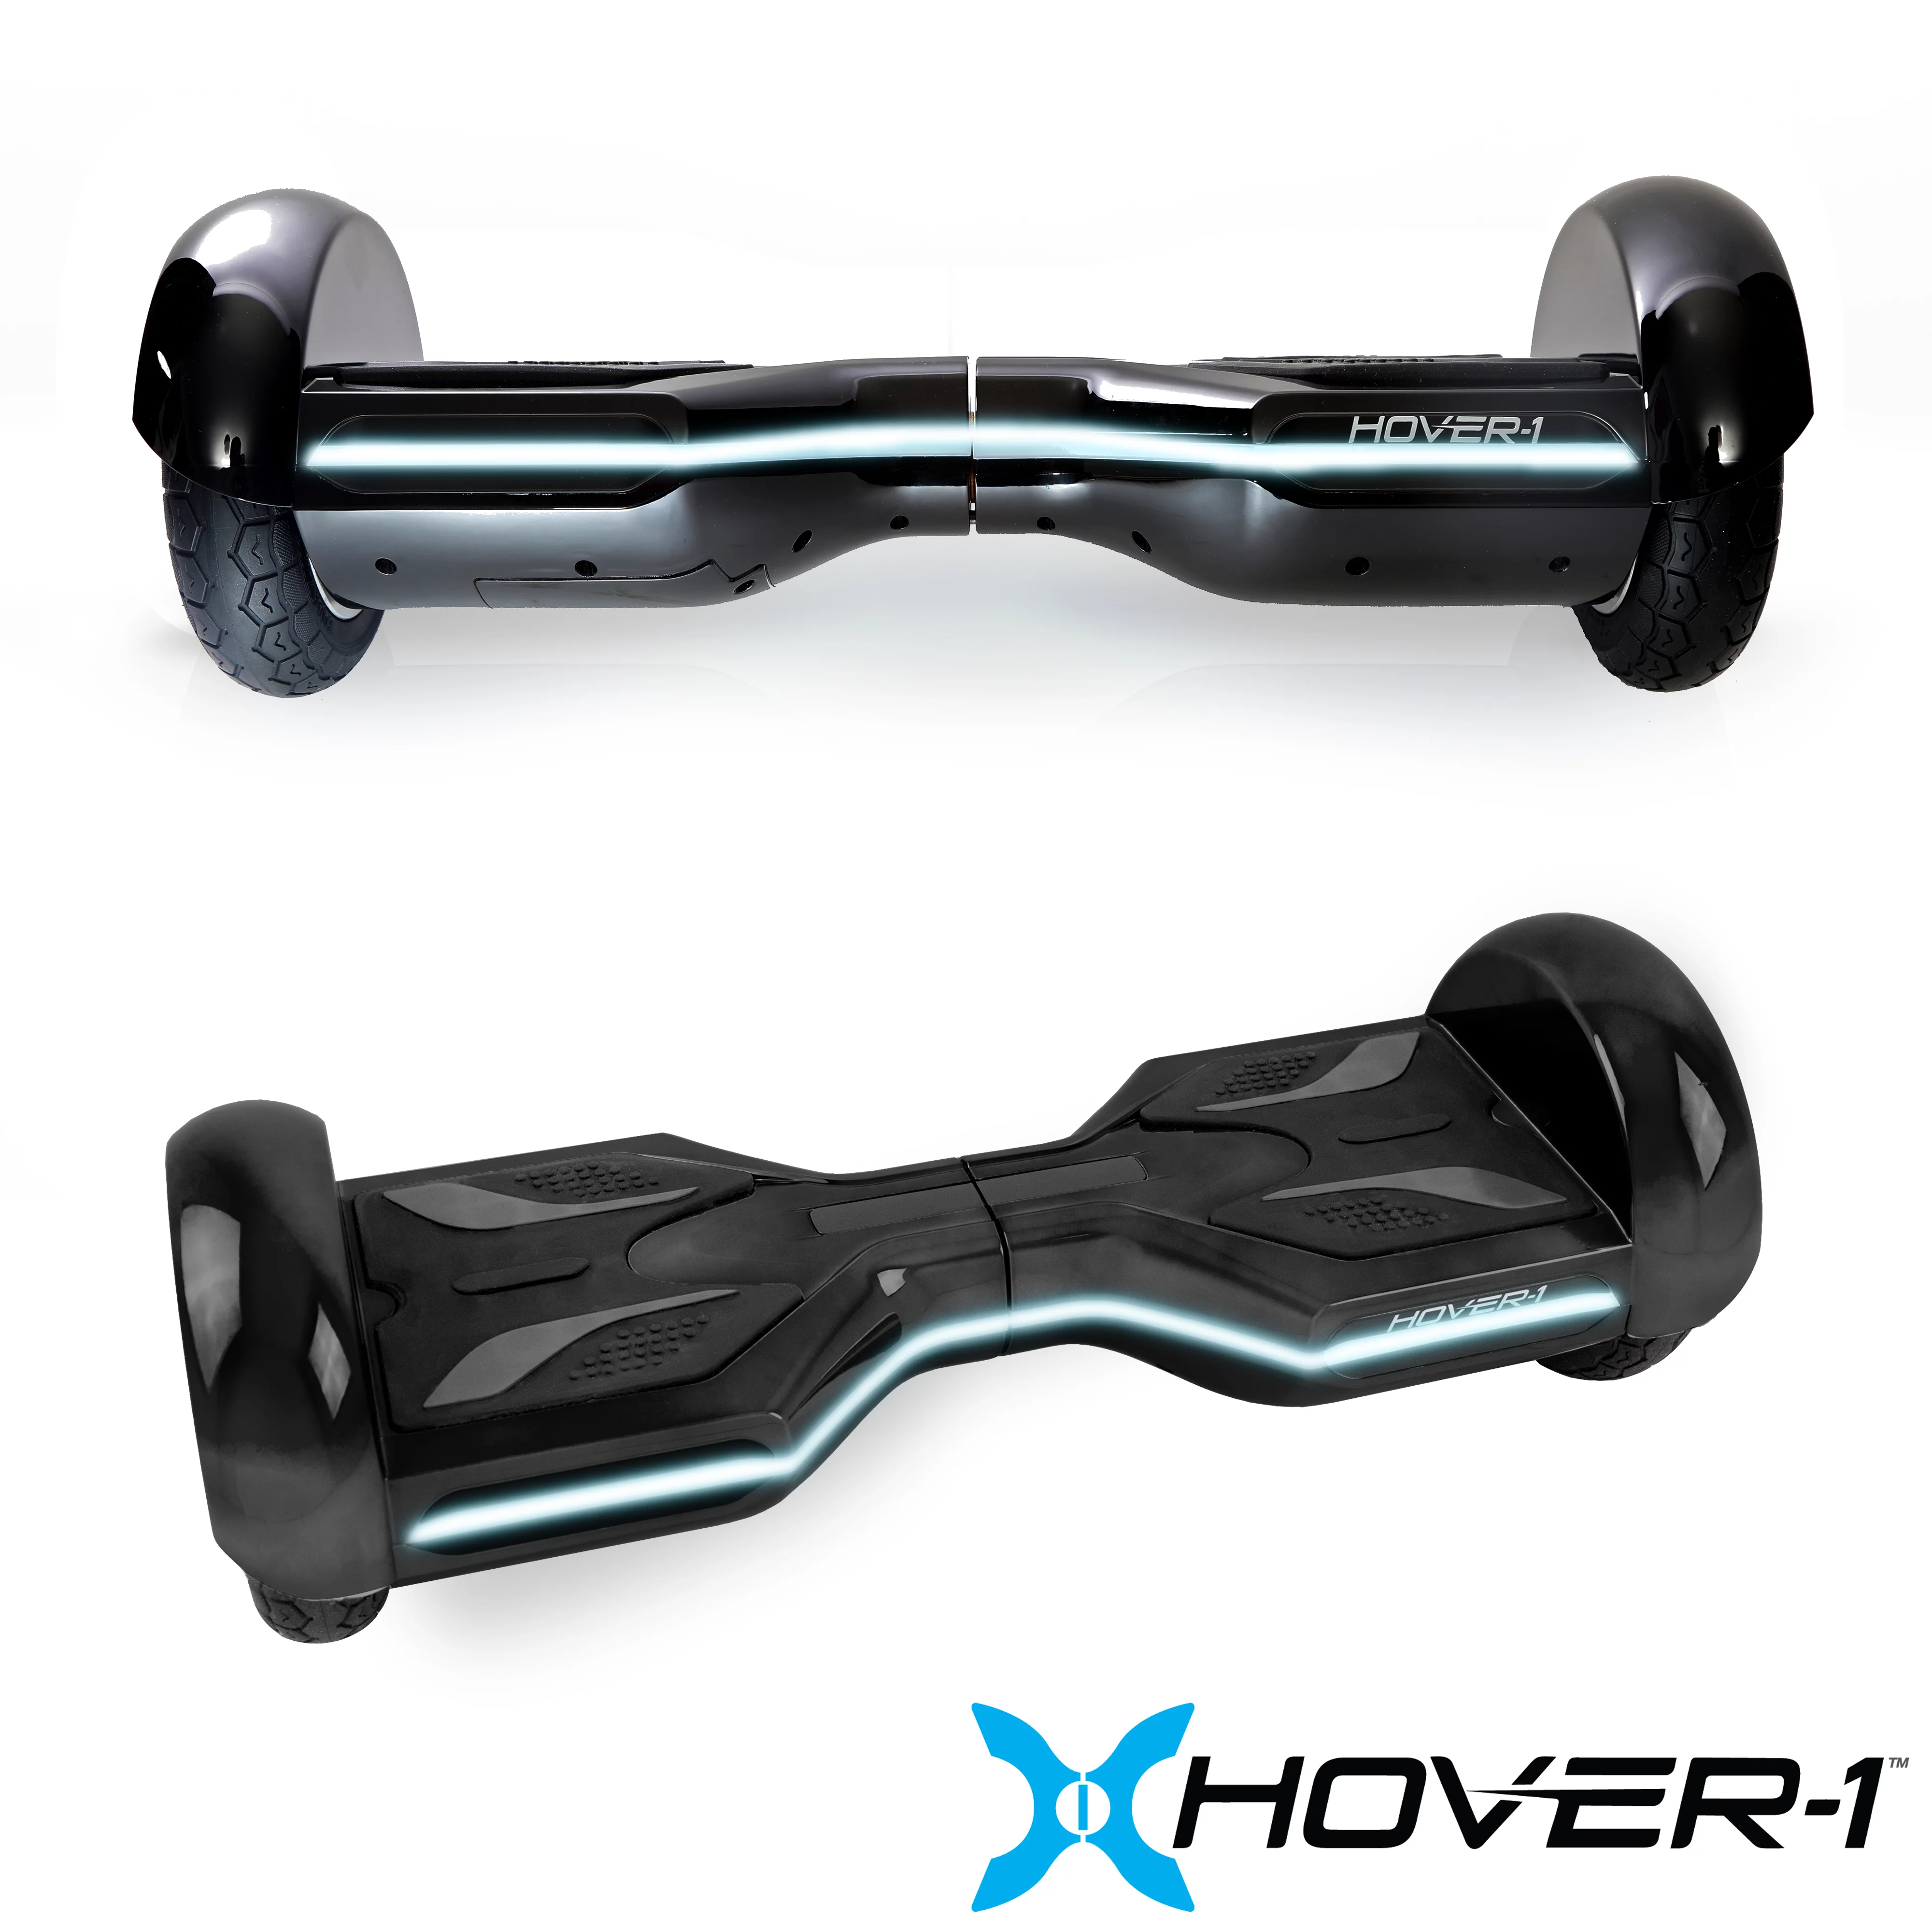 Hover-1 Eclipse UL Certified Electric Hoverboard w/ 6.5 Wheels, LED Lights, Bluetooth Speaker, and App enabled - Black